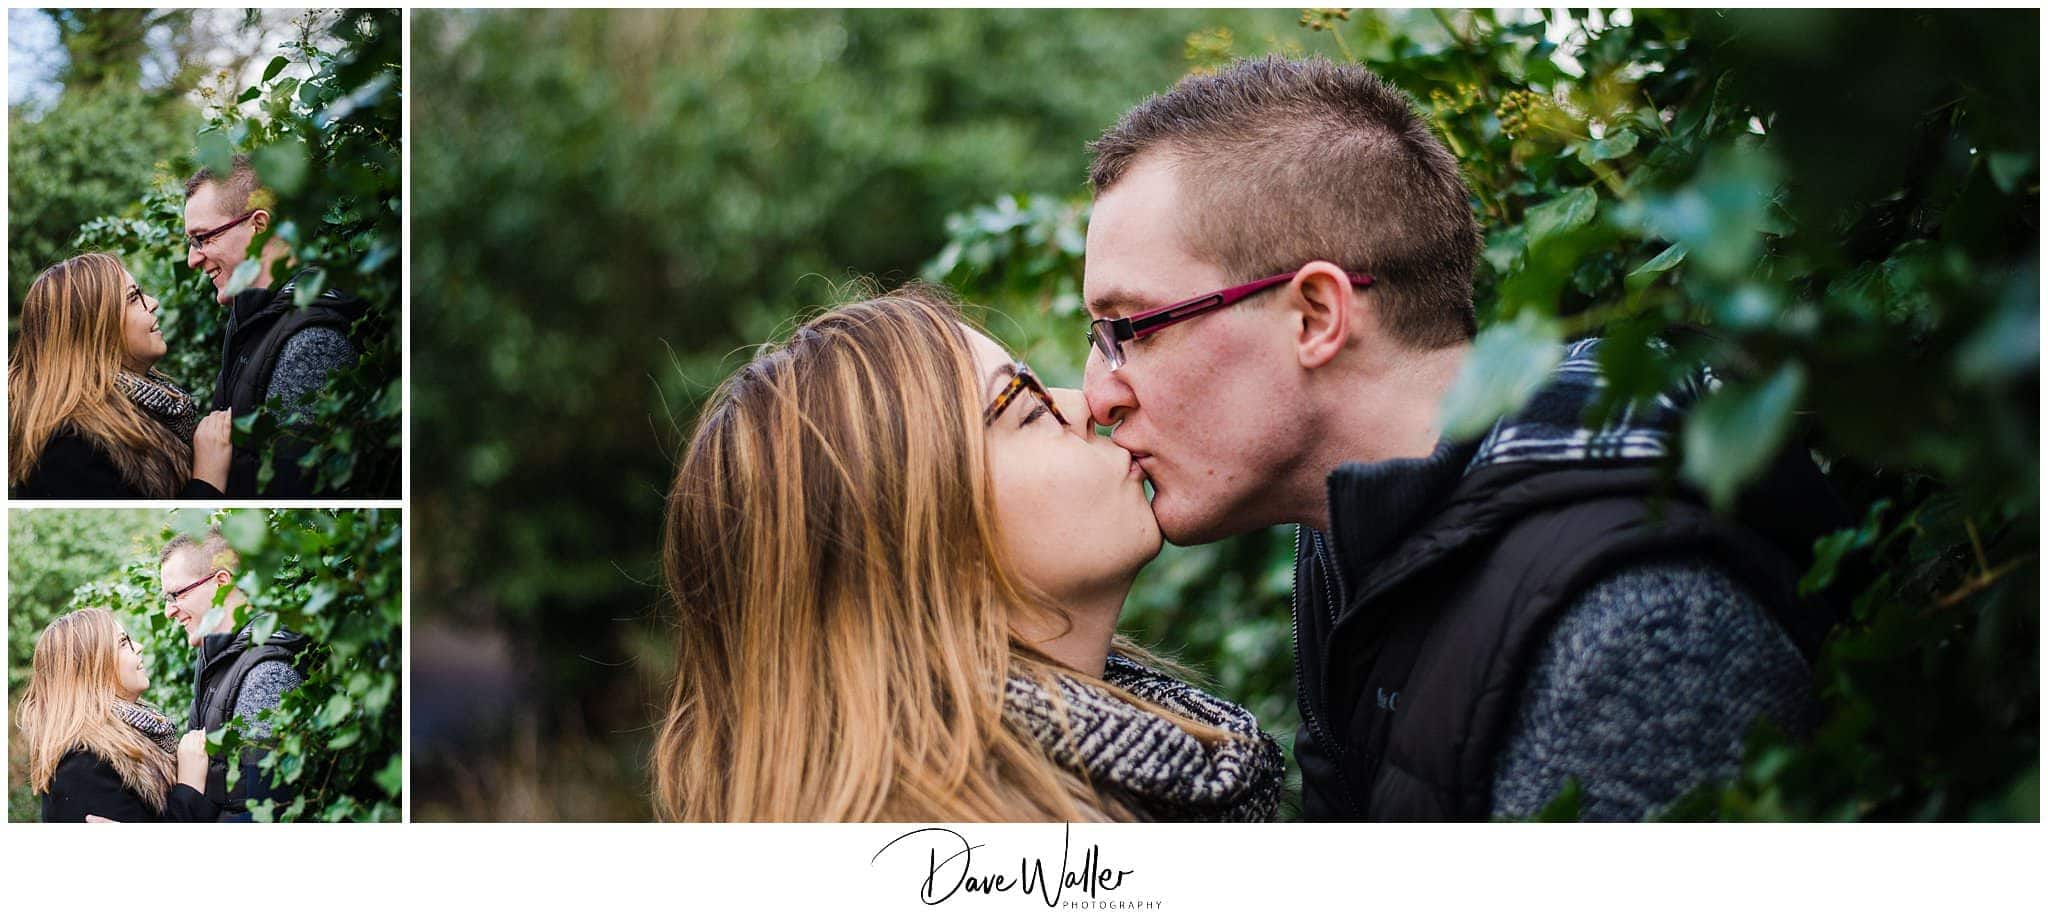 A collage of three images capturing Connie & Daniel's affectionate moment, as they kiss and embrace among green foliage during their Easter engagement shoot.